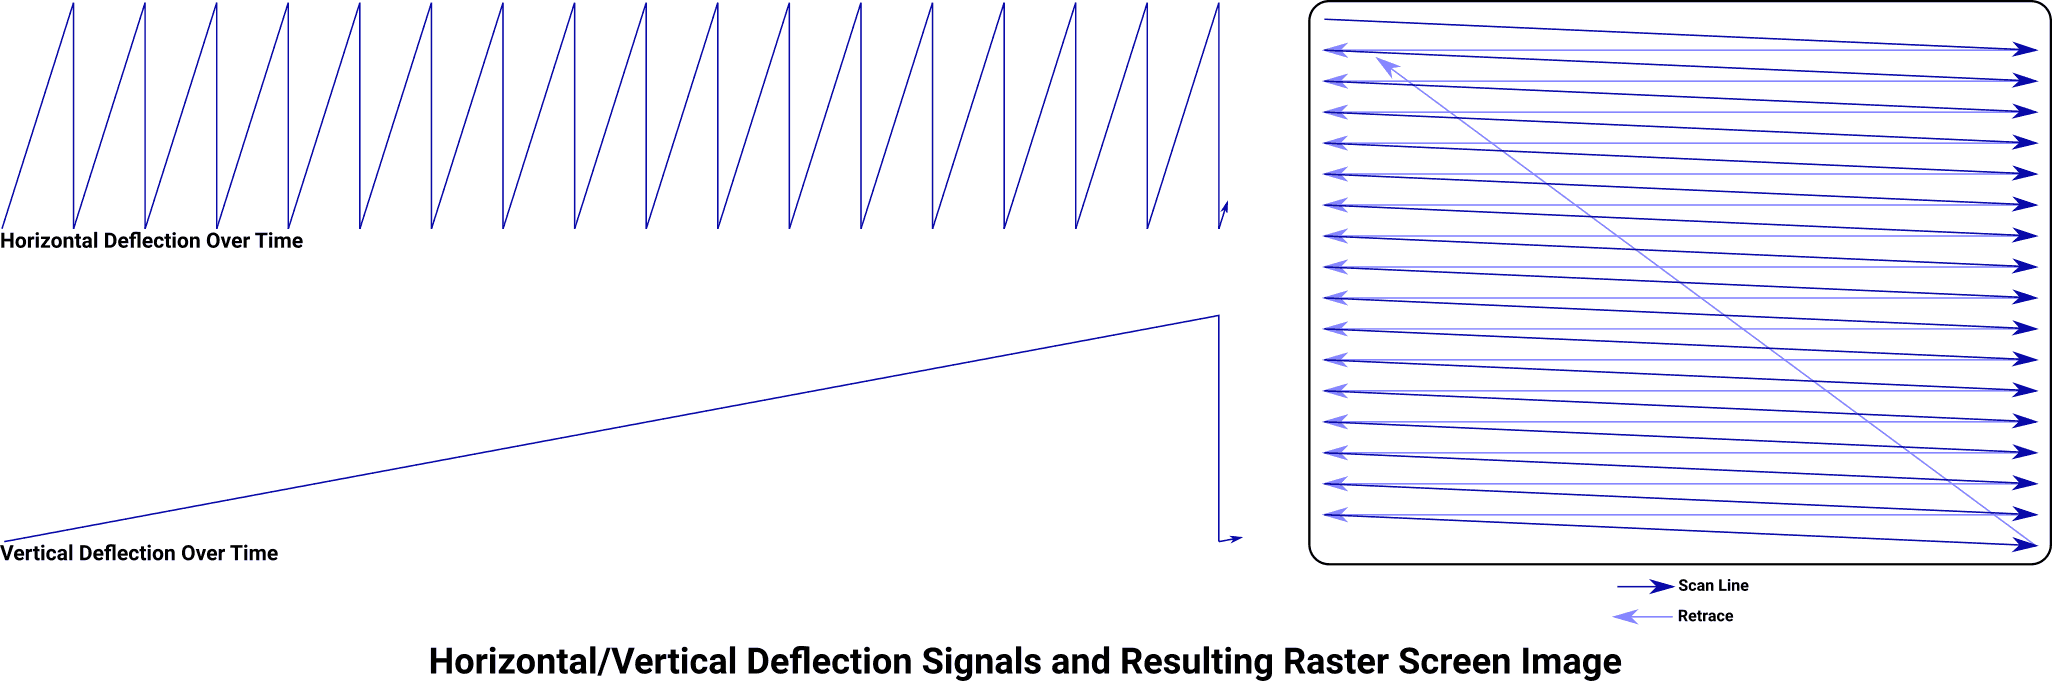 Horizontal/vertical deflection signals and resulting raster screen image.